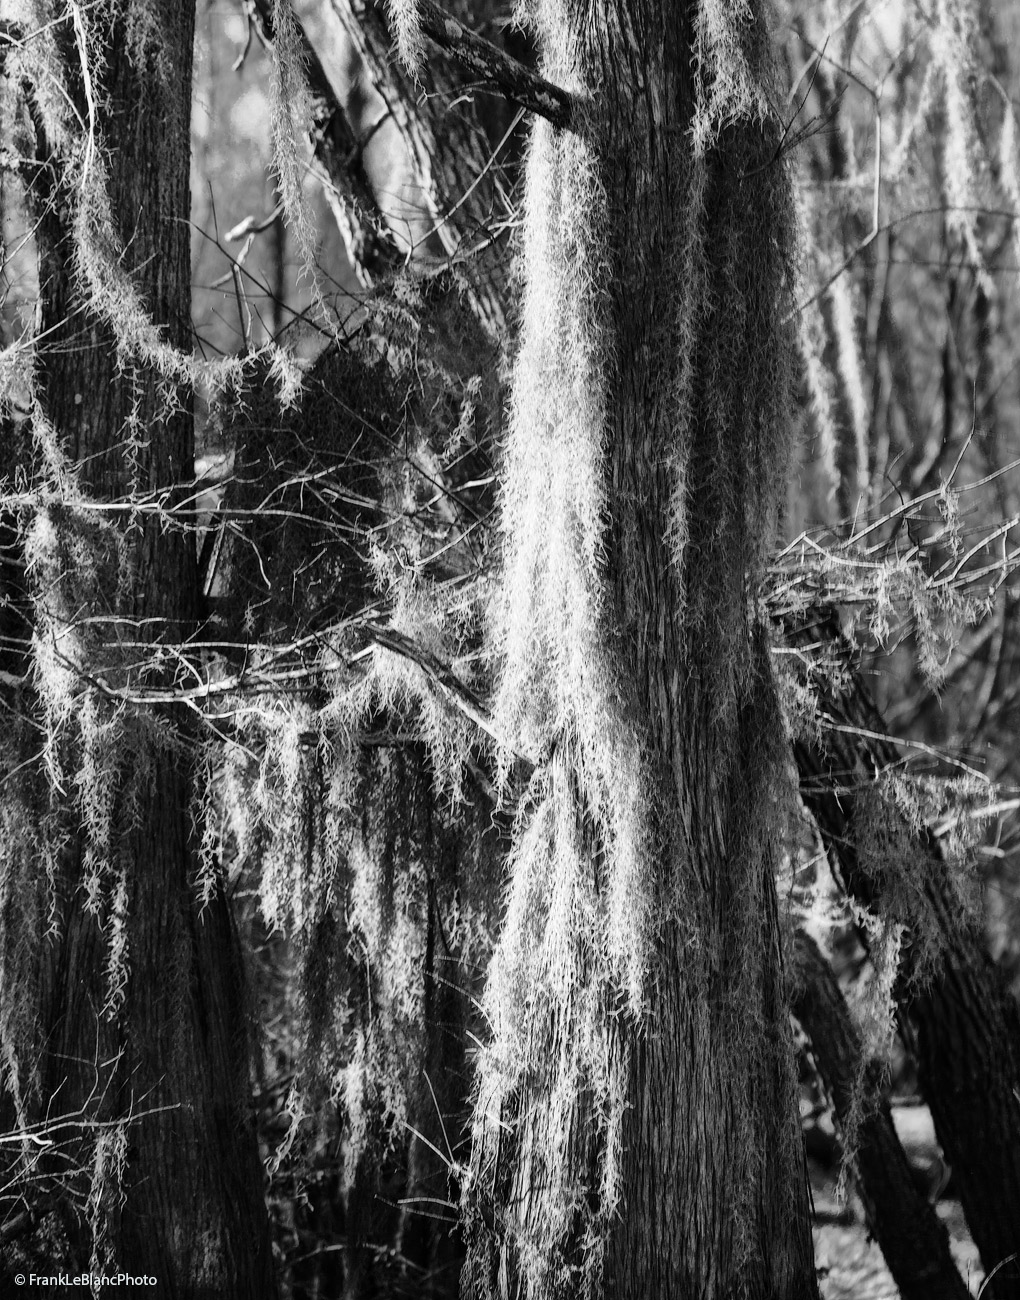 Standing trees, fallen trees and broken limbs covered with Spanish Moss creates a maze of life forms dependent on water.